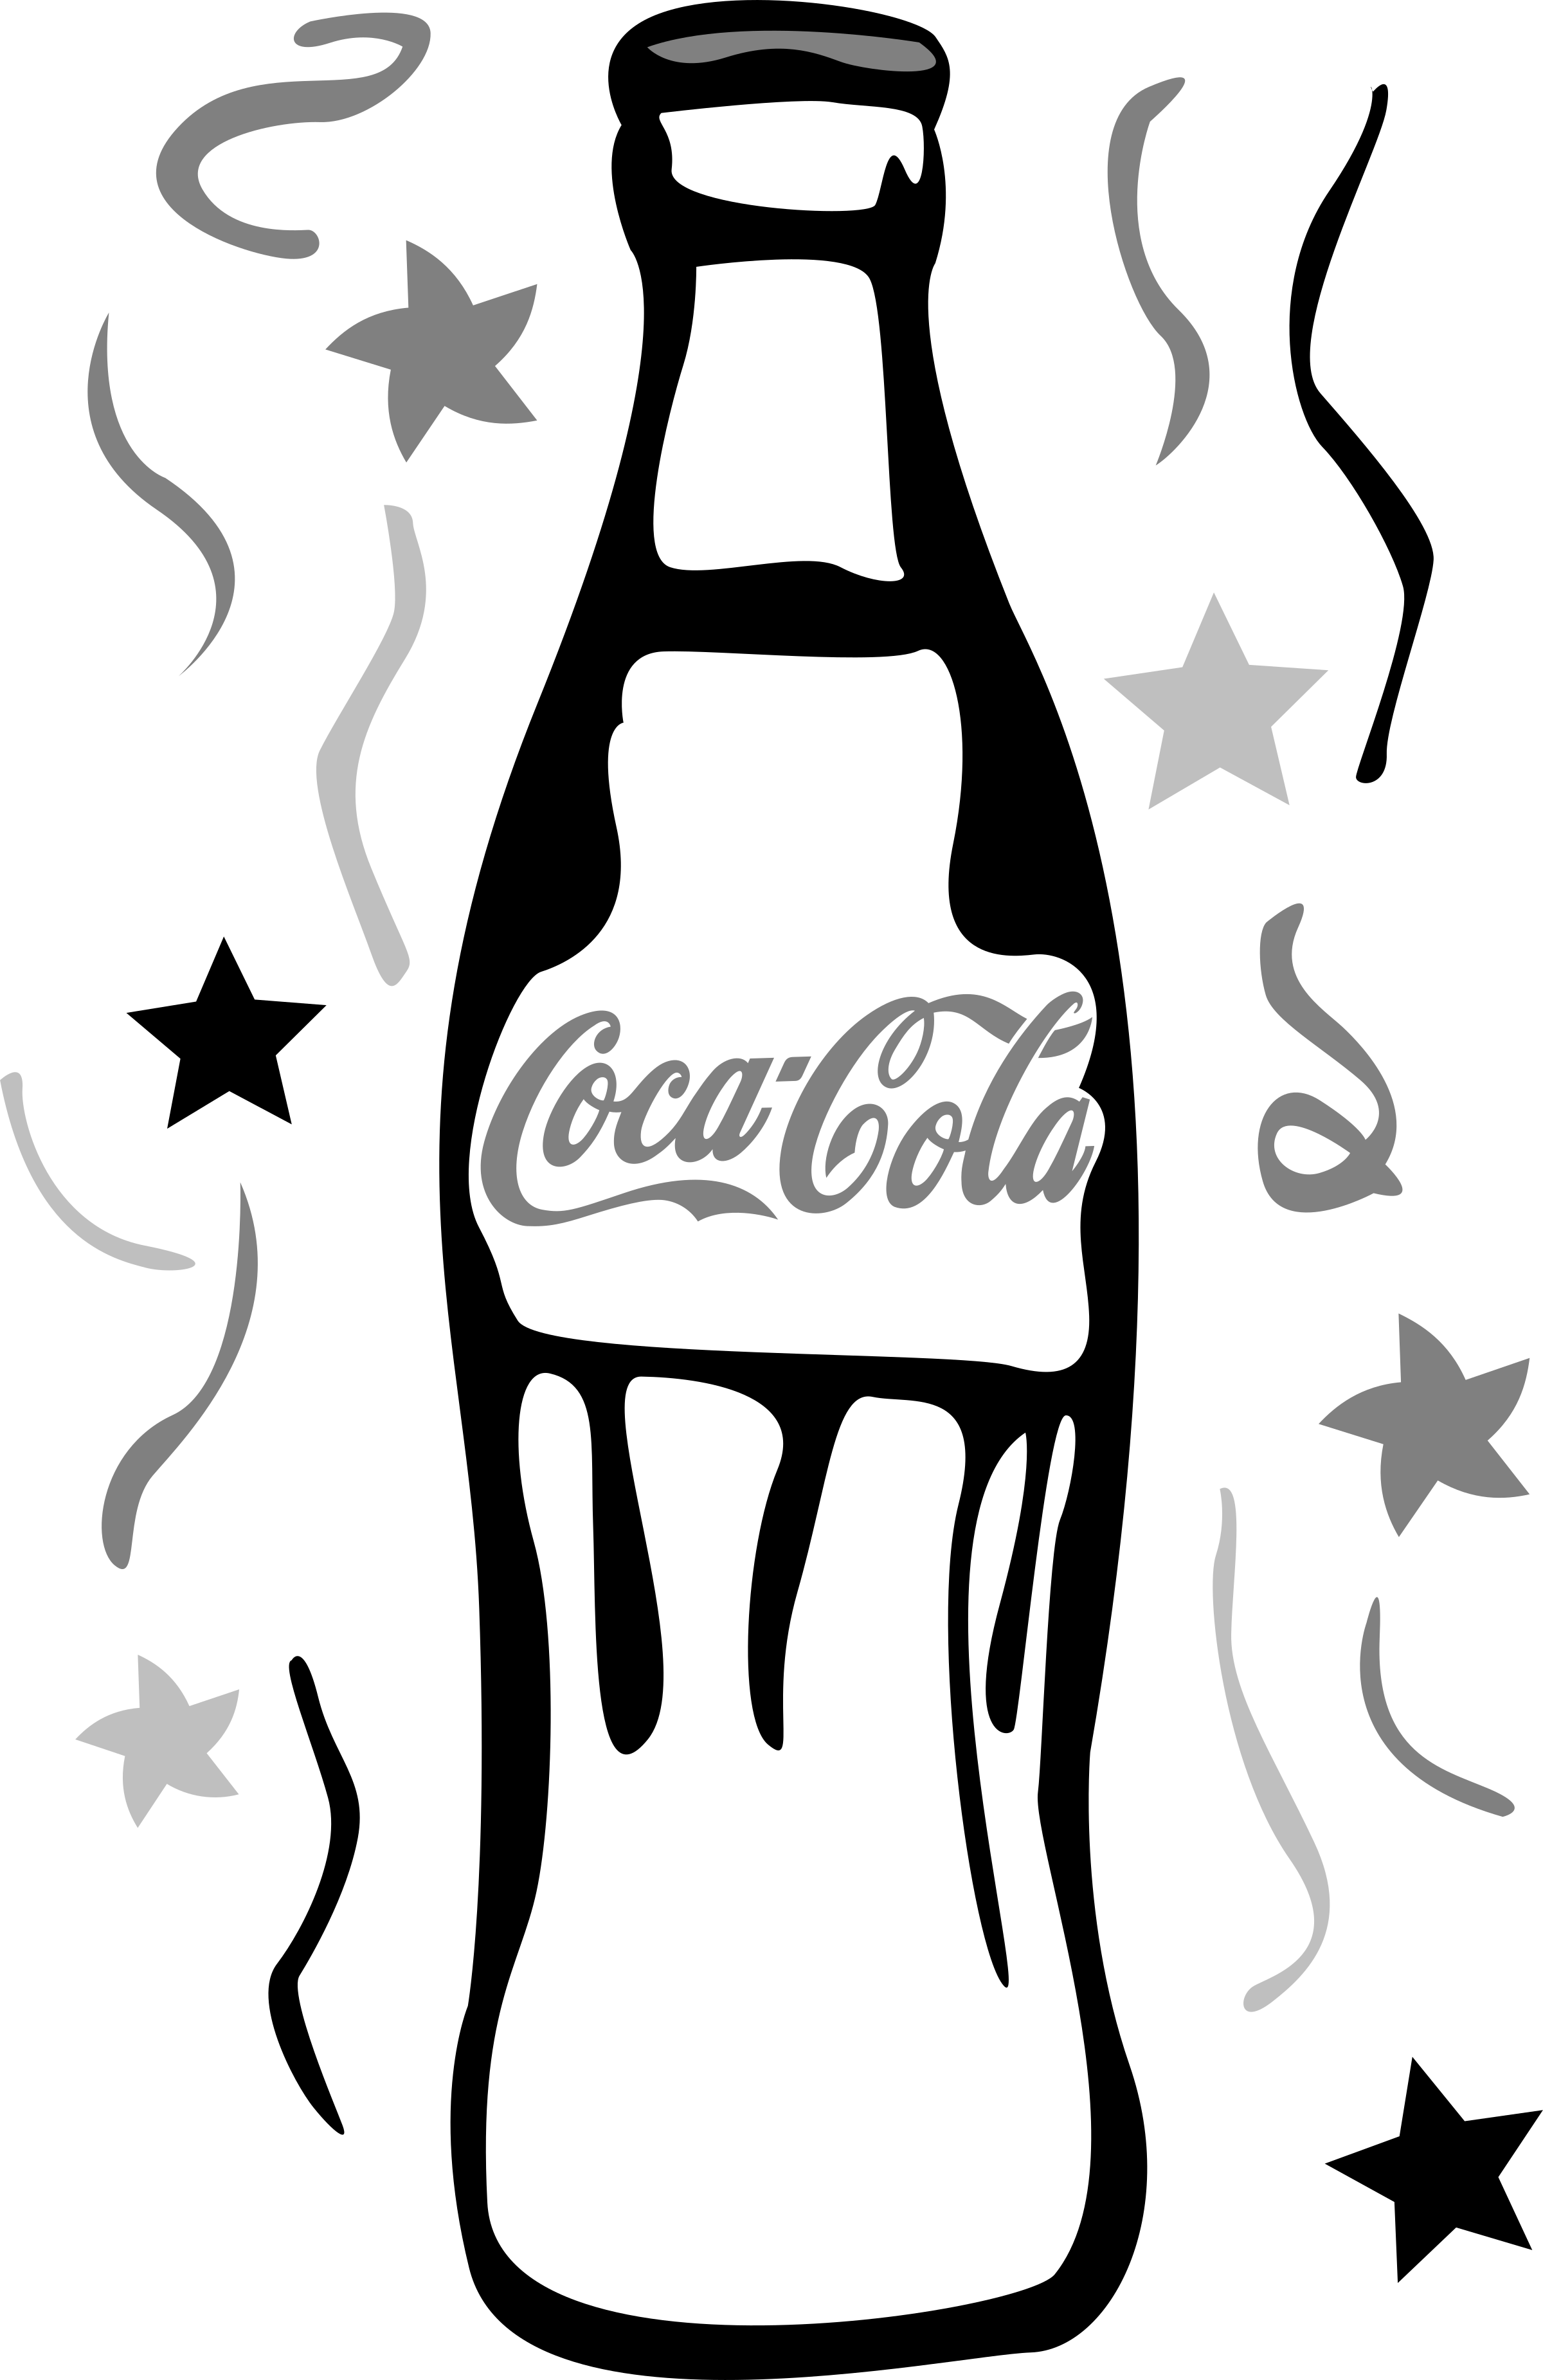 Coca Cola Bottle2 Logo Png Transparent - God, Country And Coca-cola: The Definitive History (3242x5000)